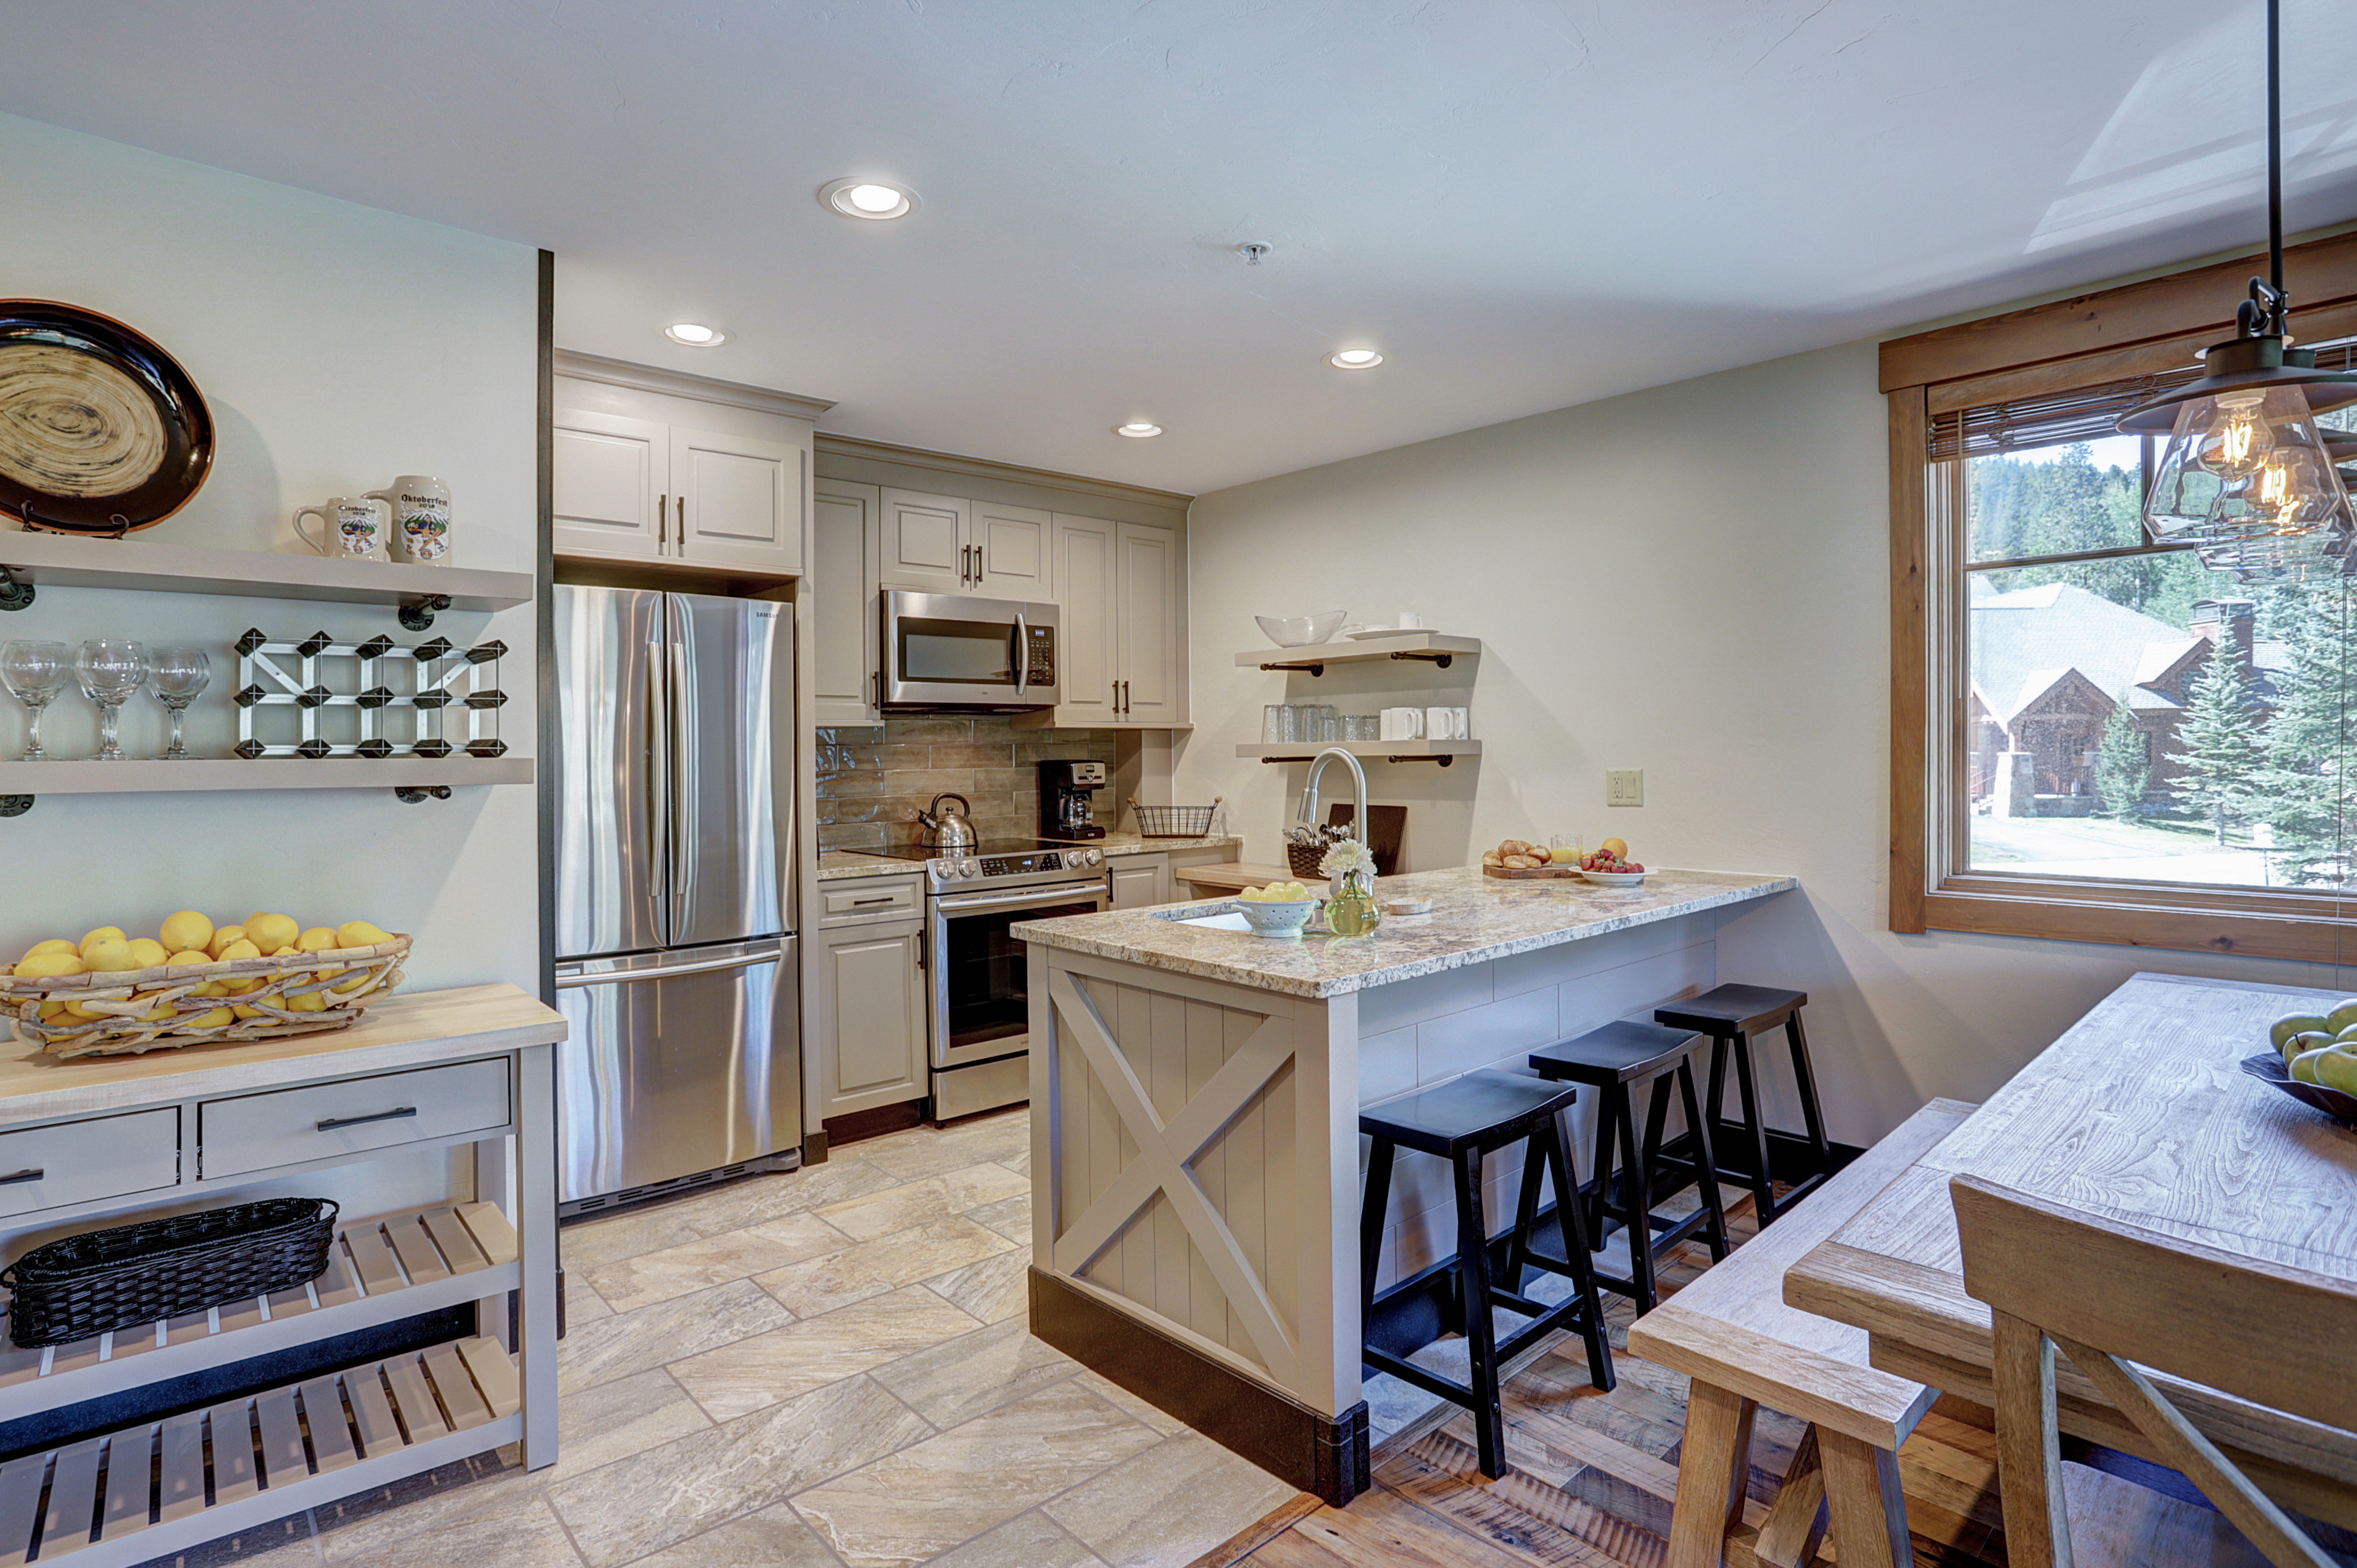 The cook in your group will love this remodeled kitchen with granite counters and stainless appliances